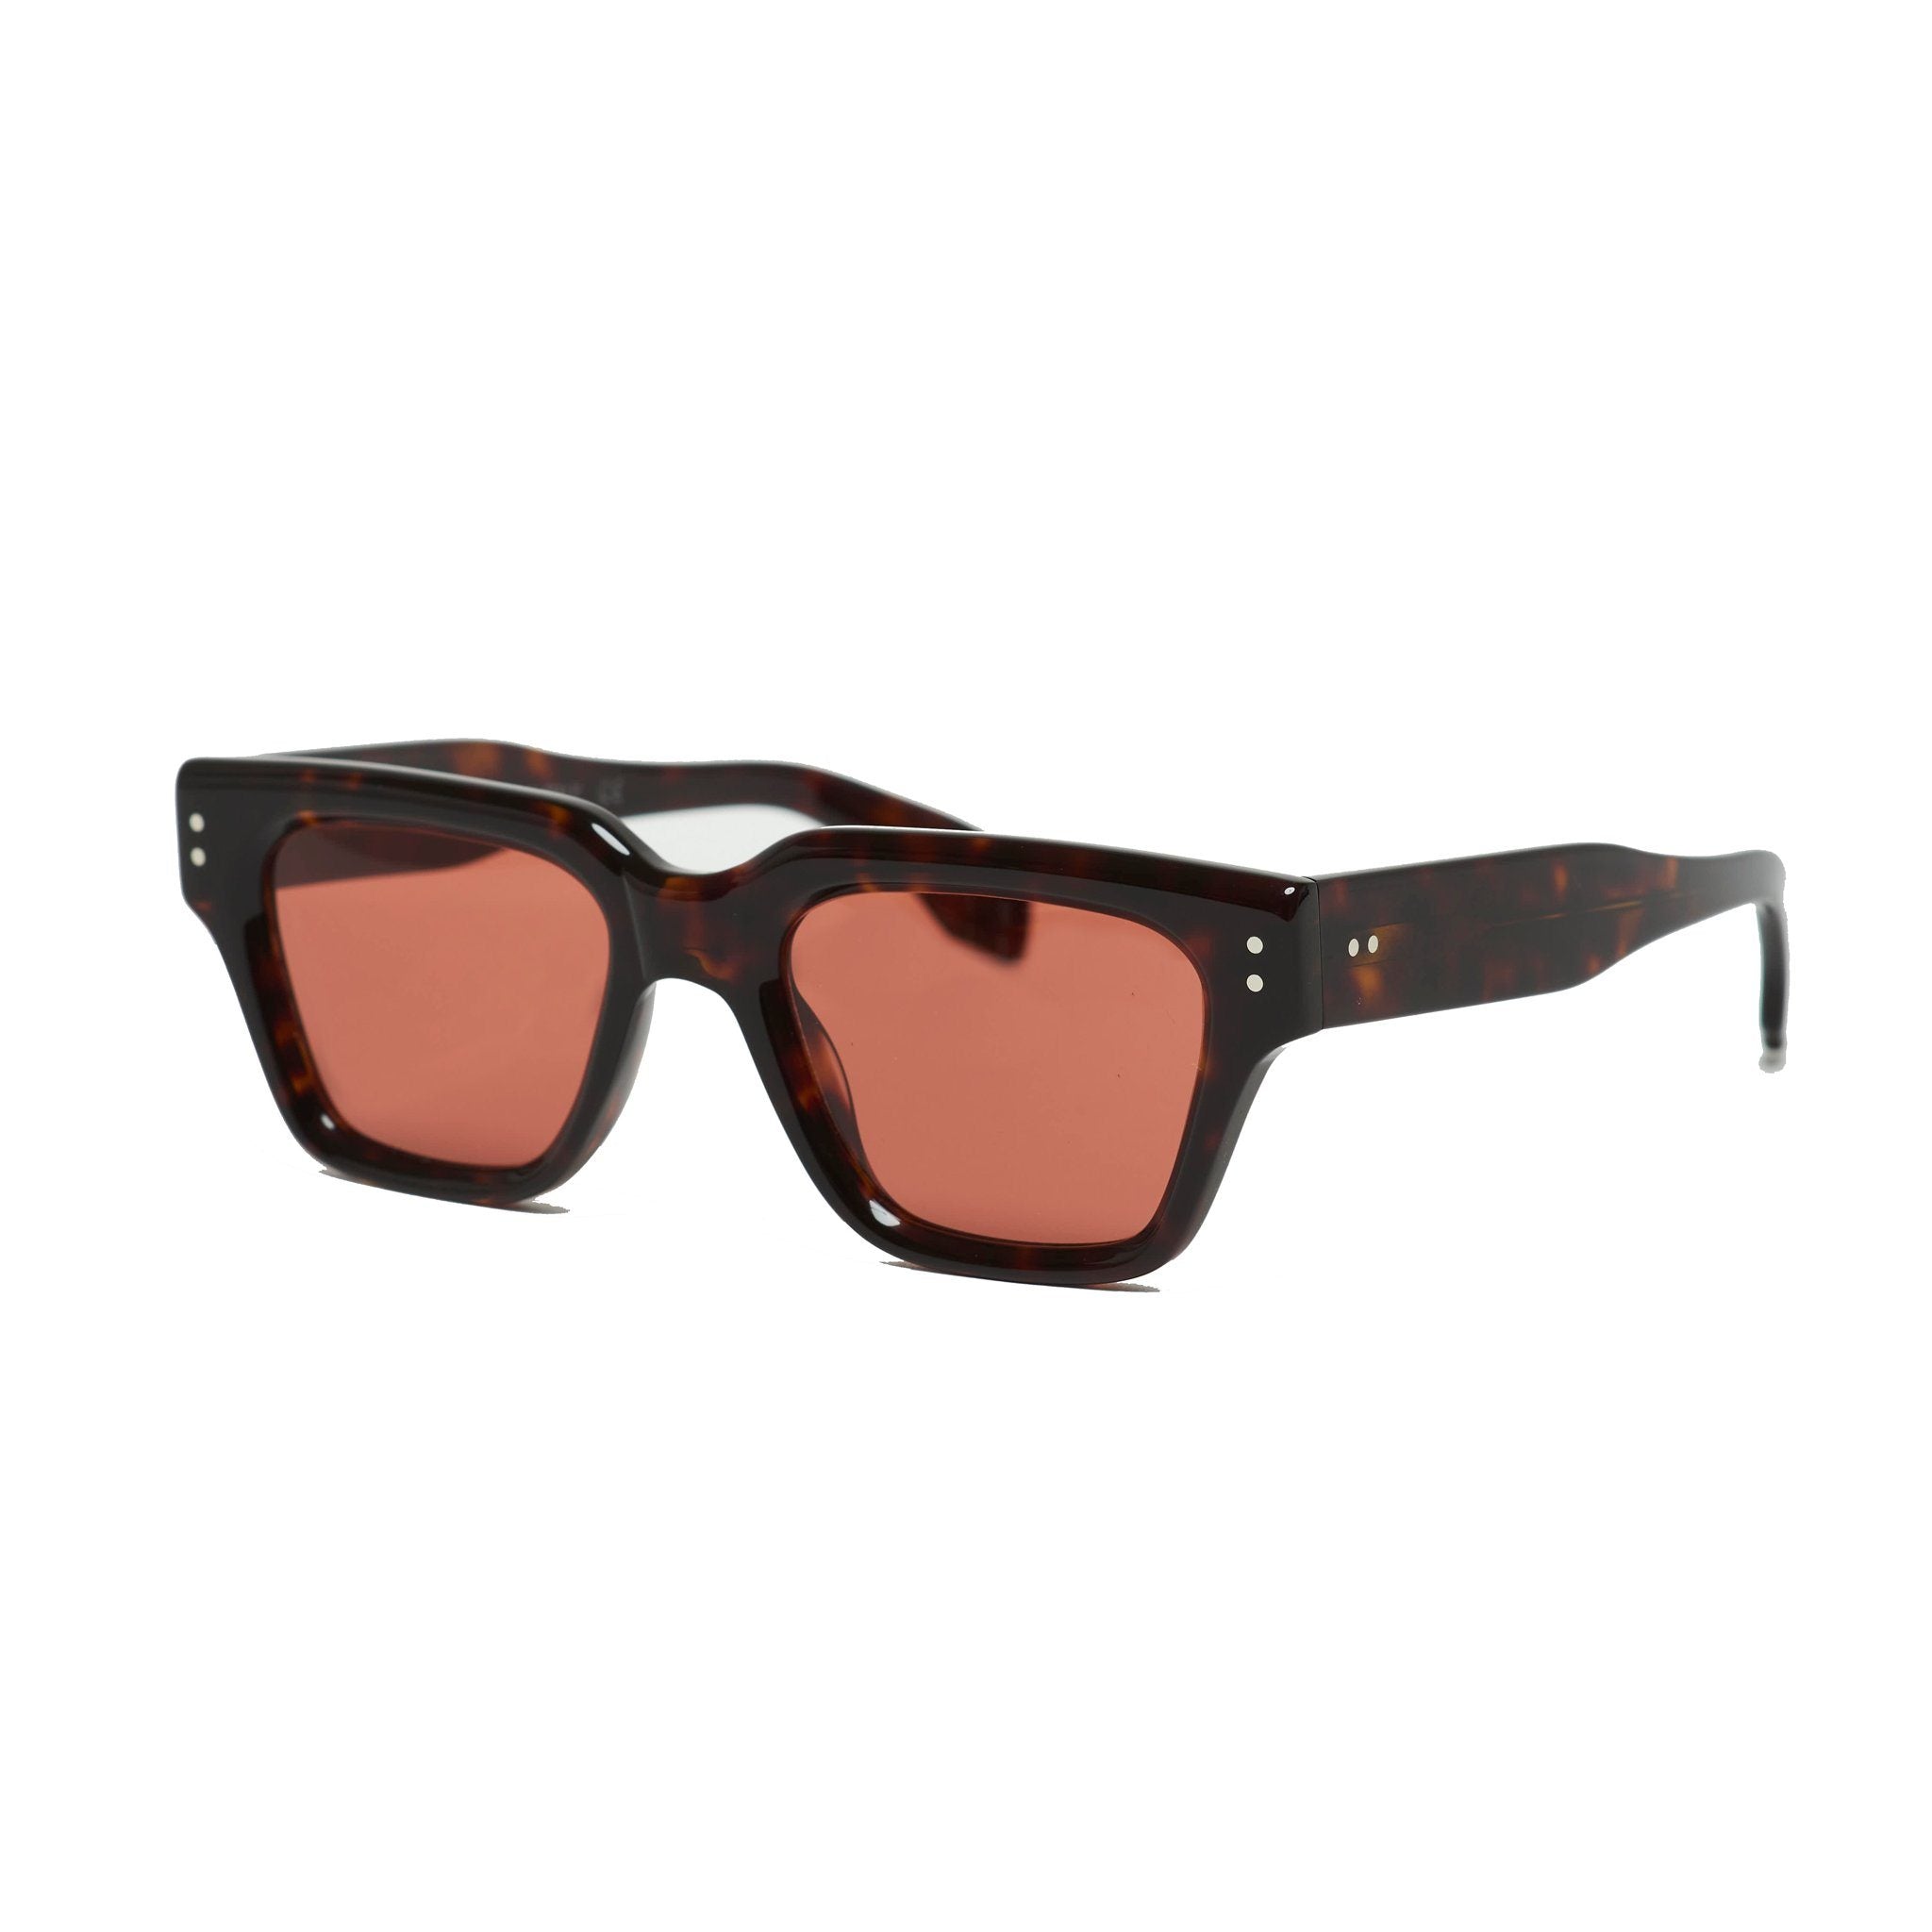 Tortoise frames sunglasses with red lenses. Front view